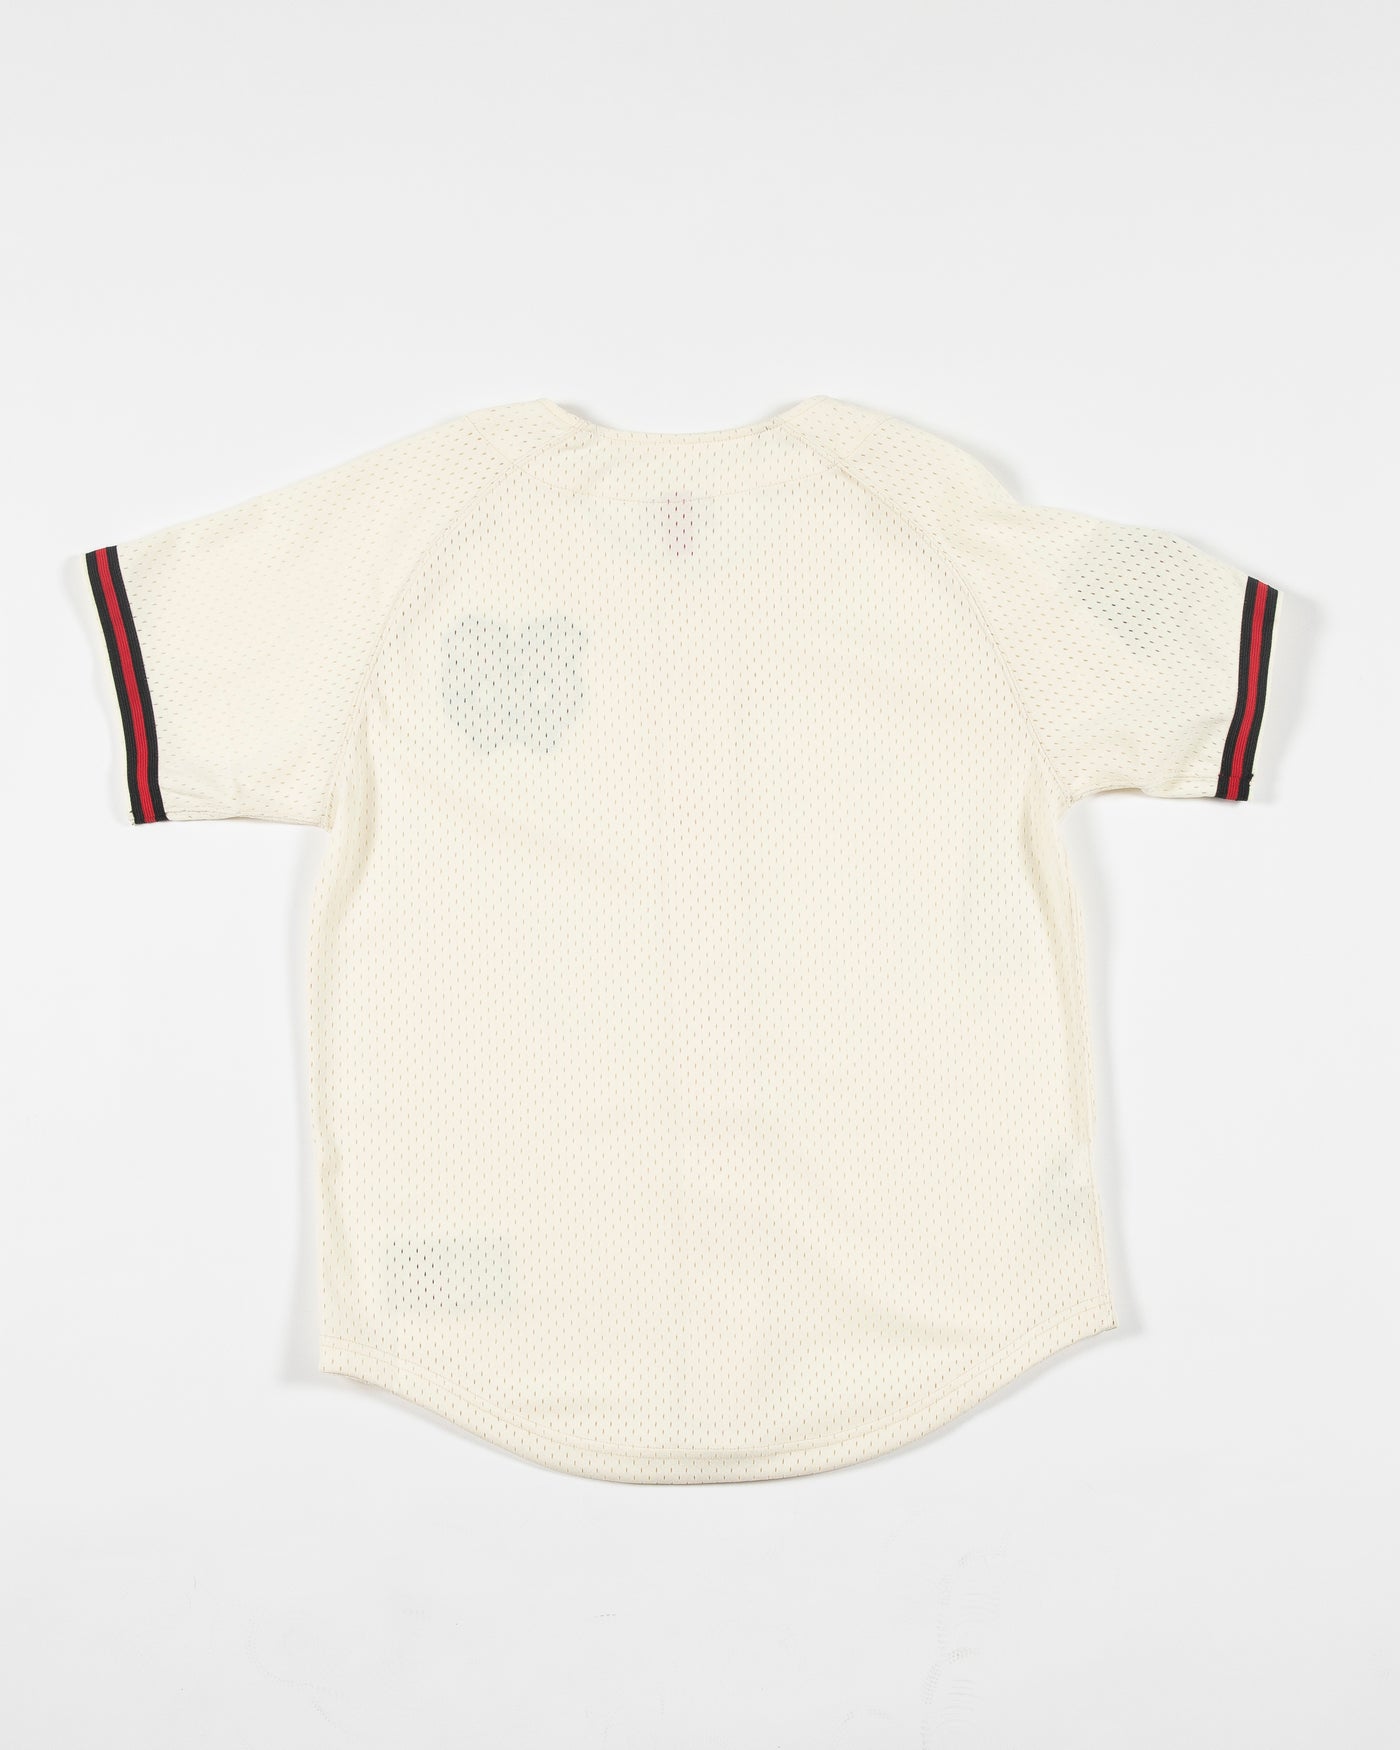 oatmeal Mitchell & Ness baseball inspired jersey with Chicago Blackhawks secondary logo on left chest and primary logo on right shoulder - back lay flat